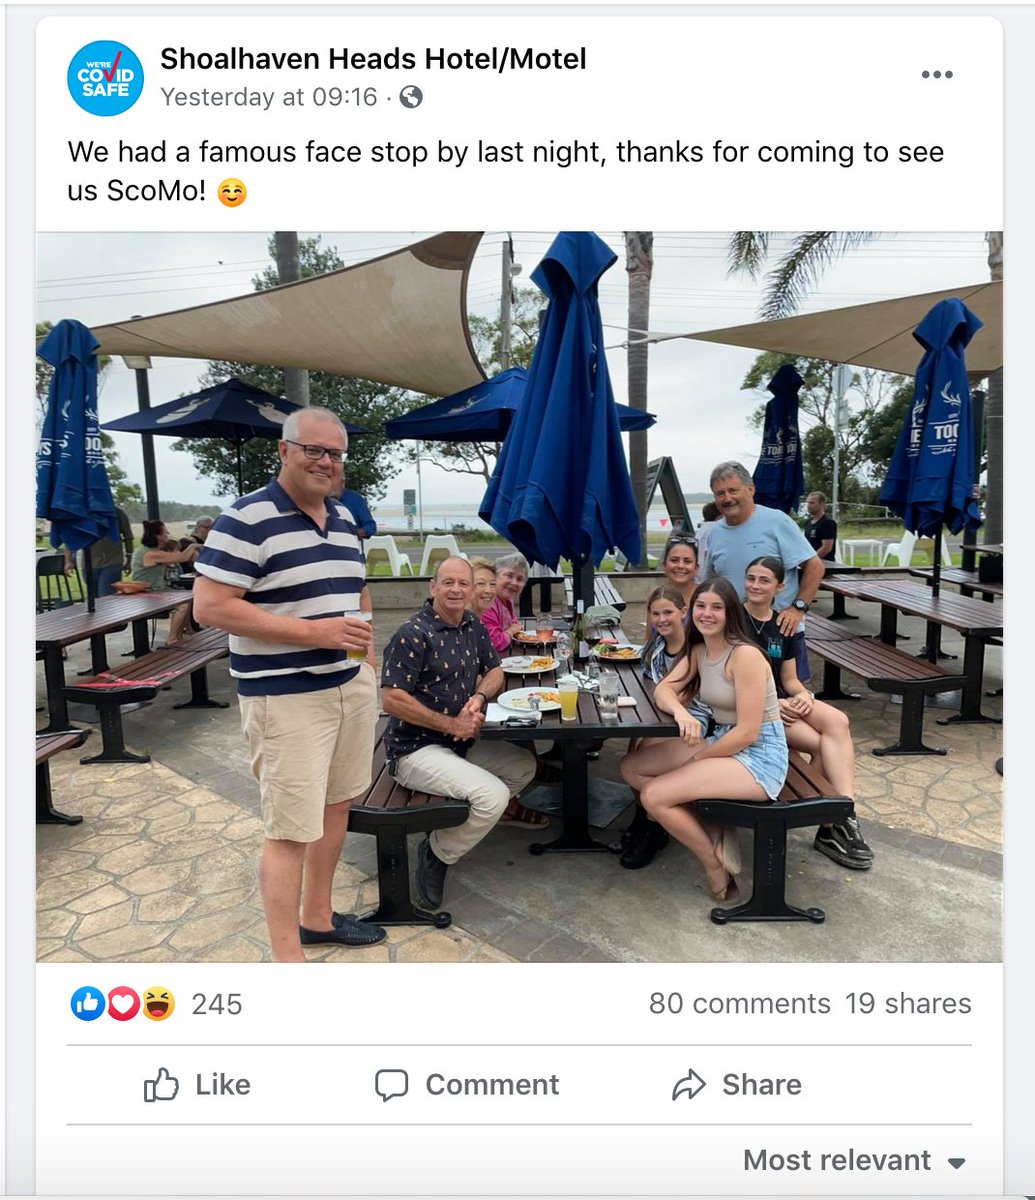 If you're in any doubt you're getting your tax's worth paying the huge team of people promoting Scott Morrison and conniving with him 24/7, you'll be pleased to know they don't take holidaysHere's Scott Morrison - yet again - at some magical place called Shoalhaven Heads Hotel.